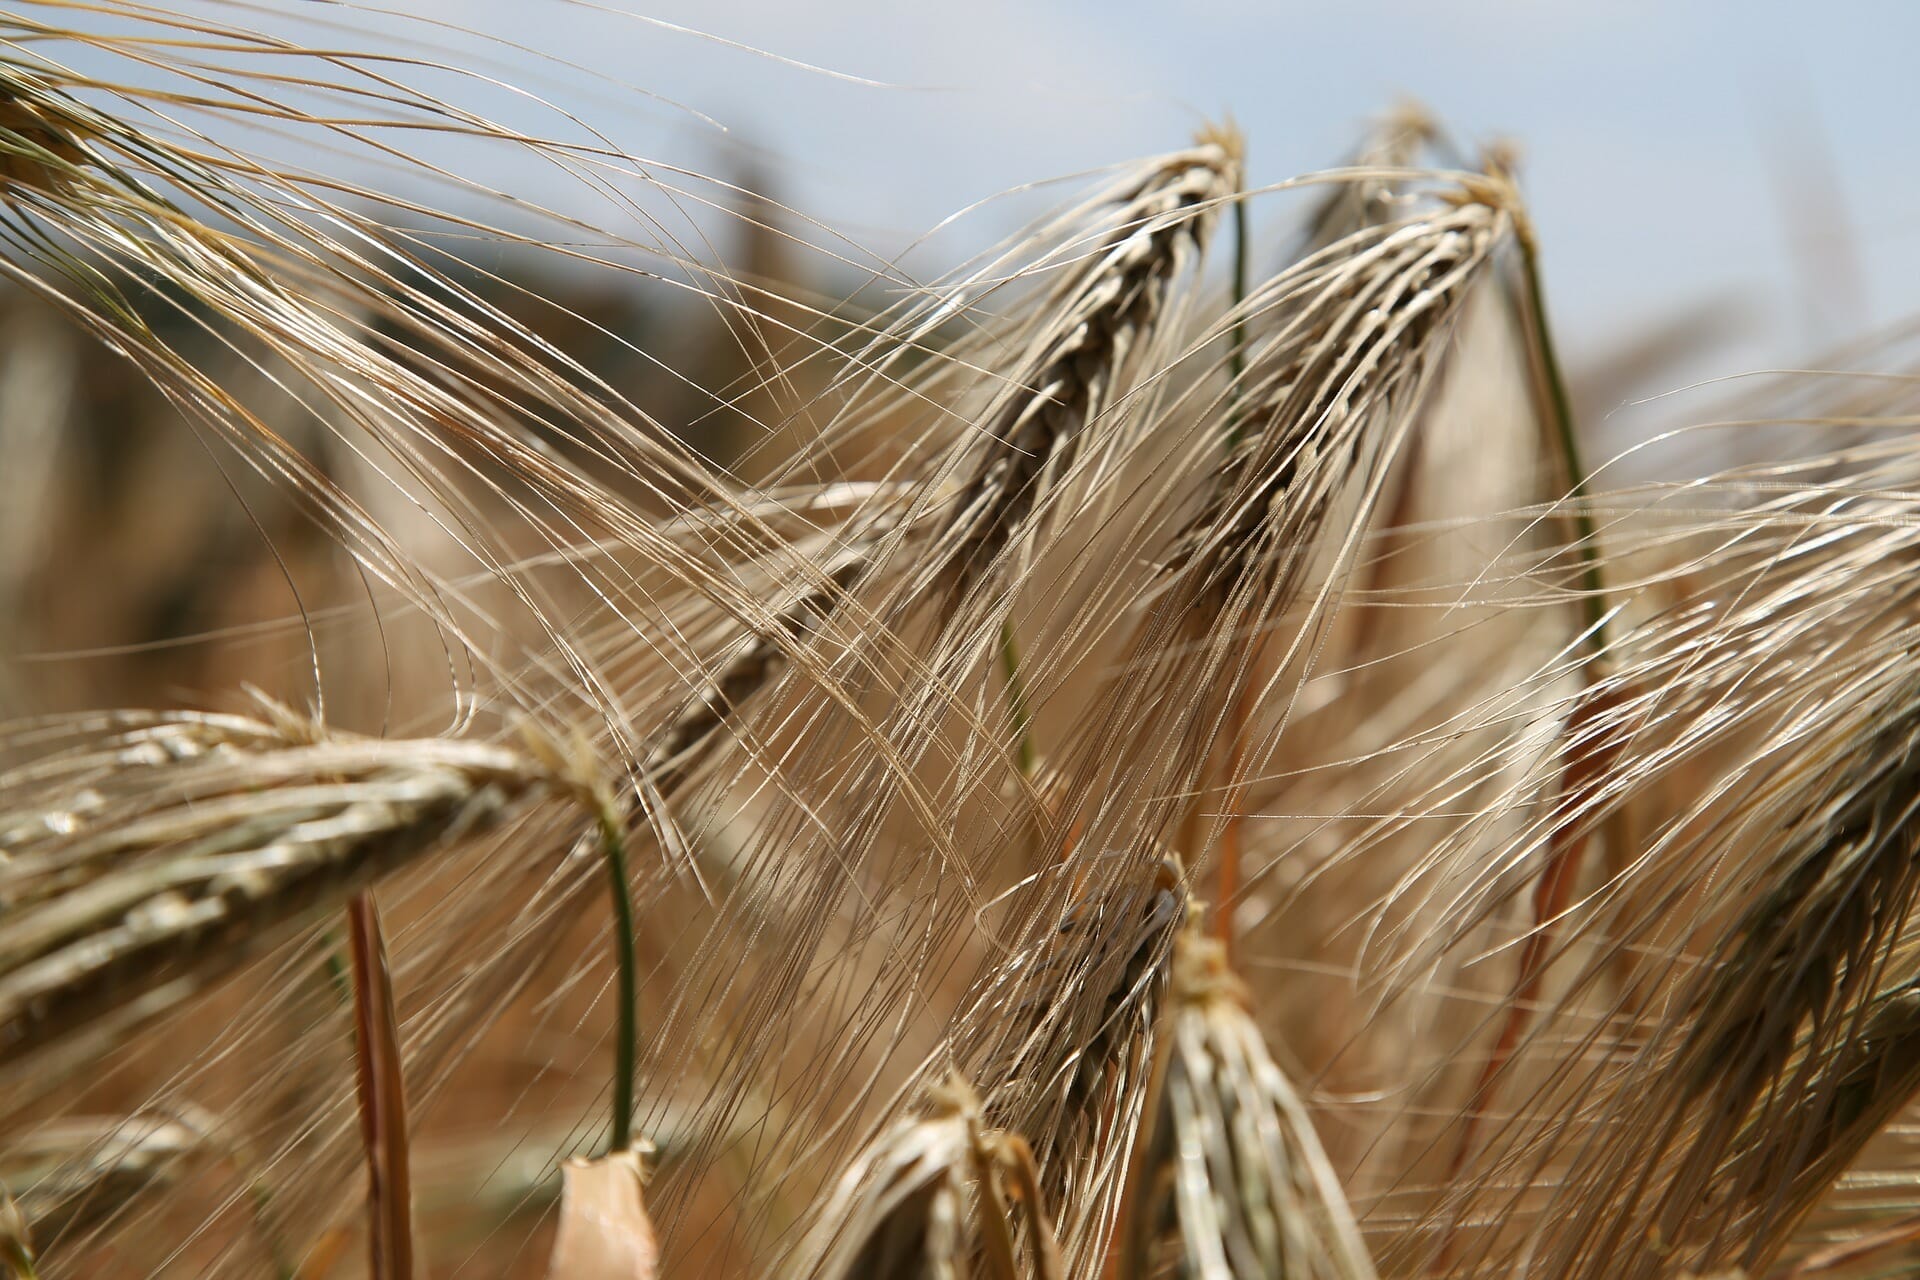 Gluten are a protein found in Wheat and other grains